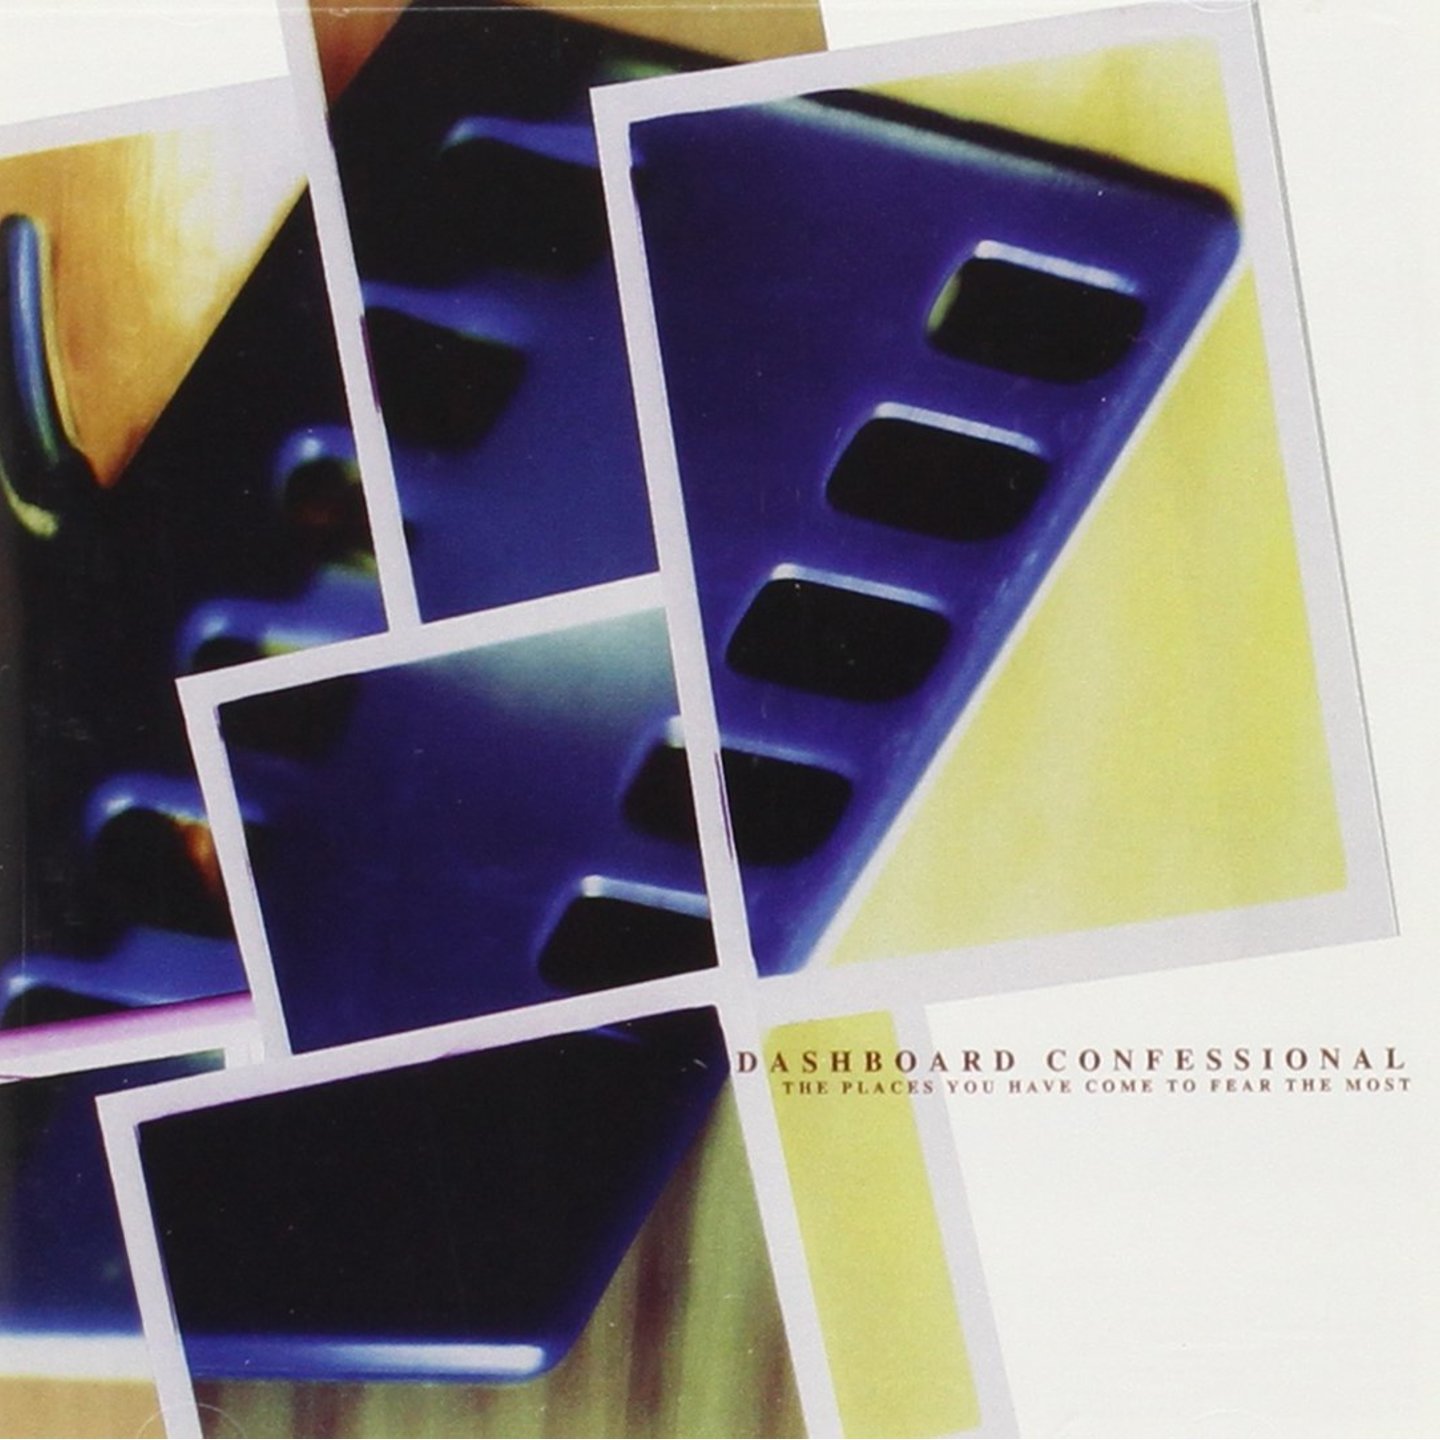 DASHBOARD CONFESSIONAL - The Places You Have Come To Fear The Most LP (Indie, Colour Vinyl)